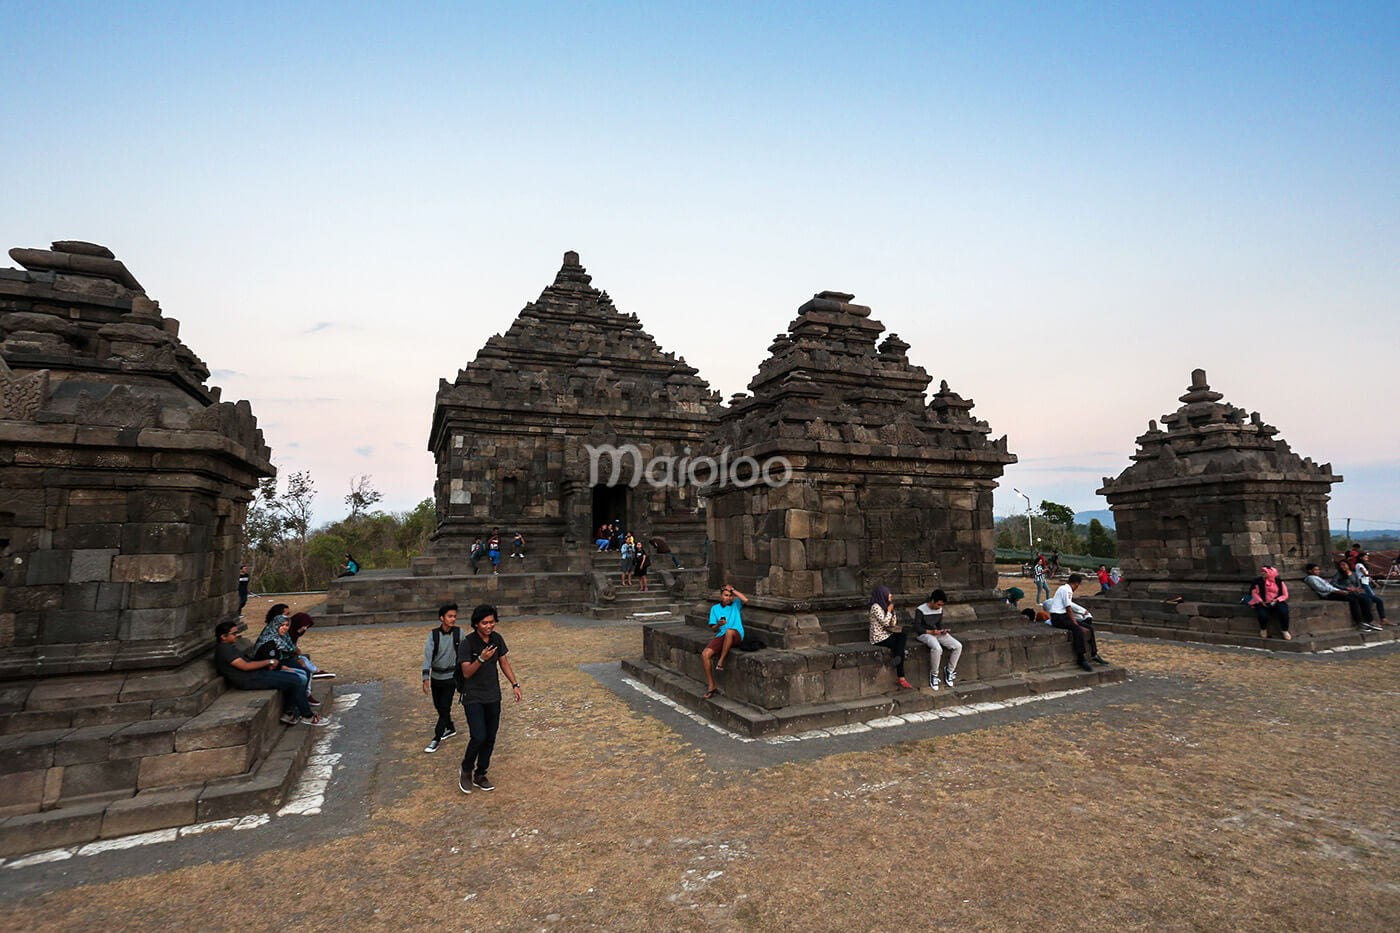 People walking and sitting around the stone temples of Ijo Temple.